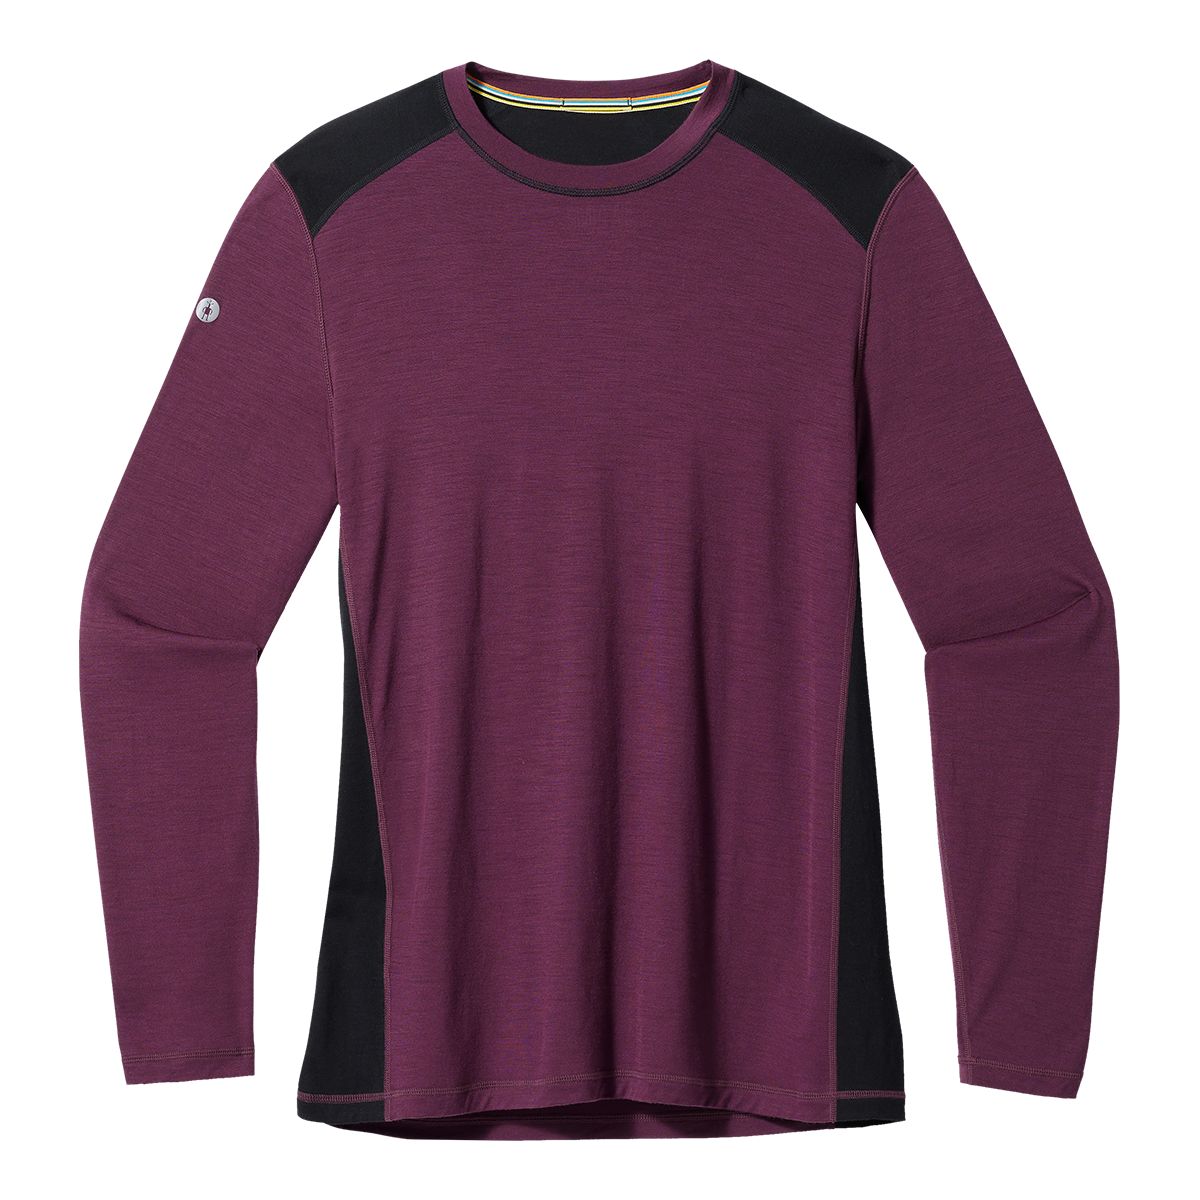 Image of Smartwool Men's Active Long Sleeve T Shirt